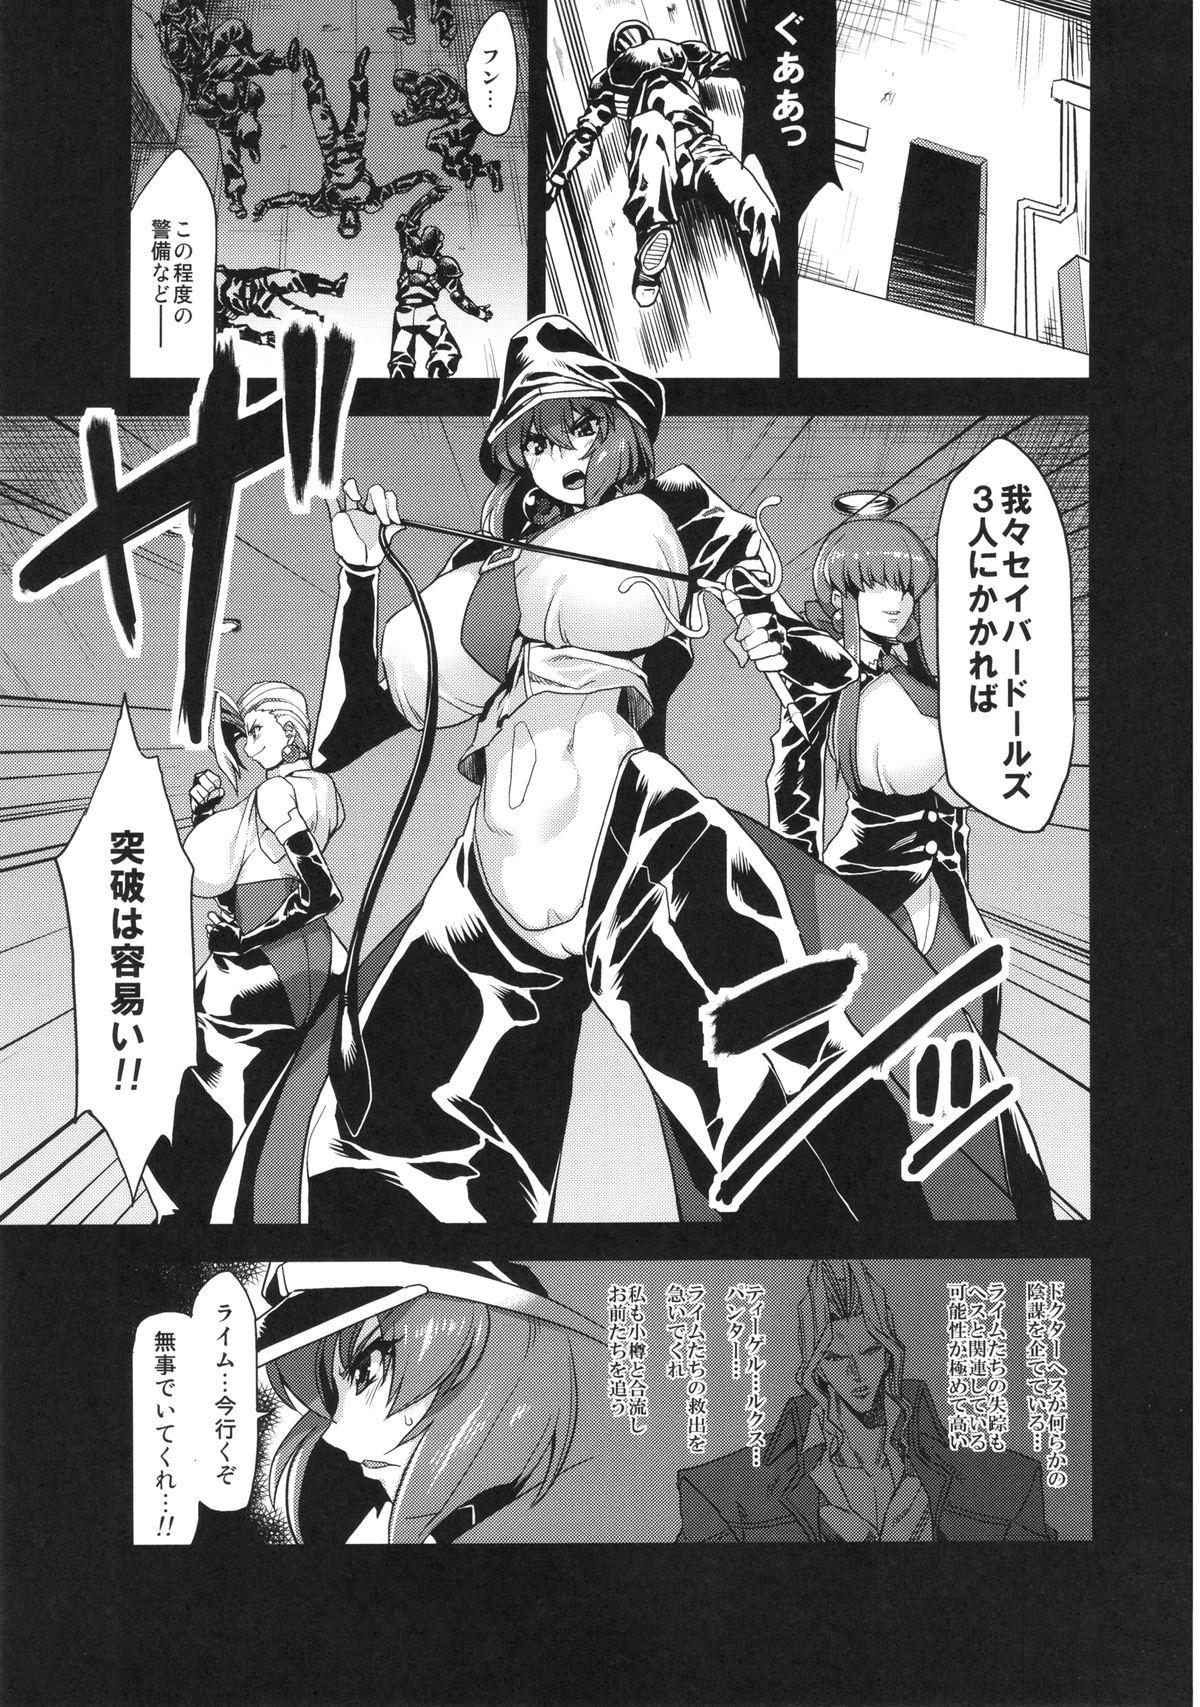 Scandal Hentai Marionette 2 + OV - REQ - Saber marionette Amature Sex Tapes - Page 2